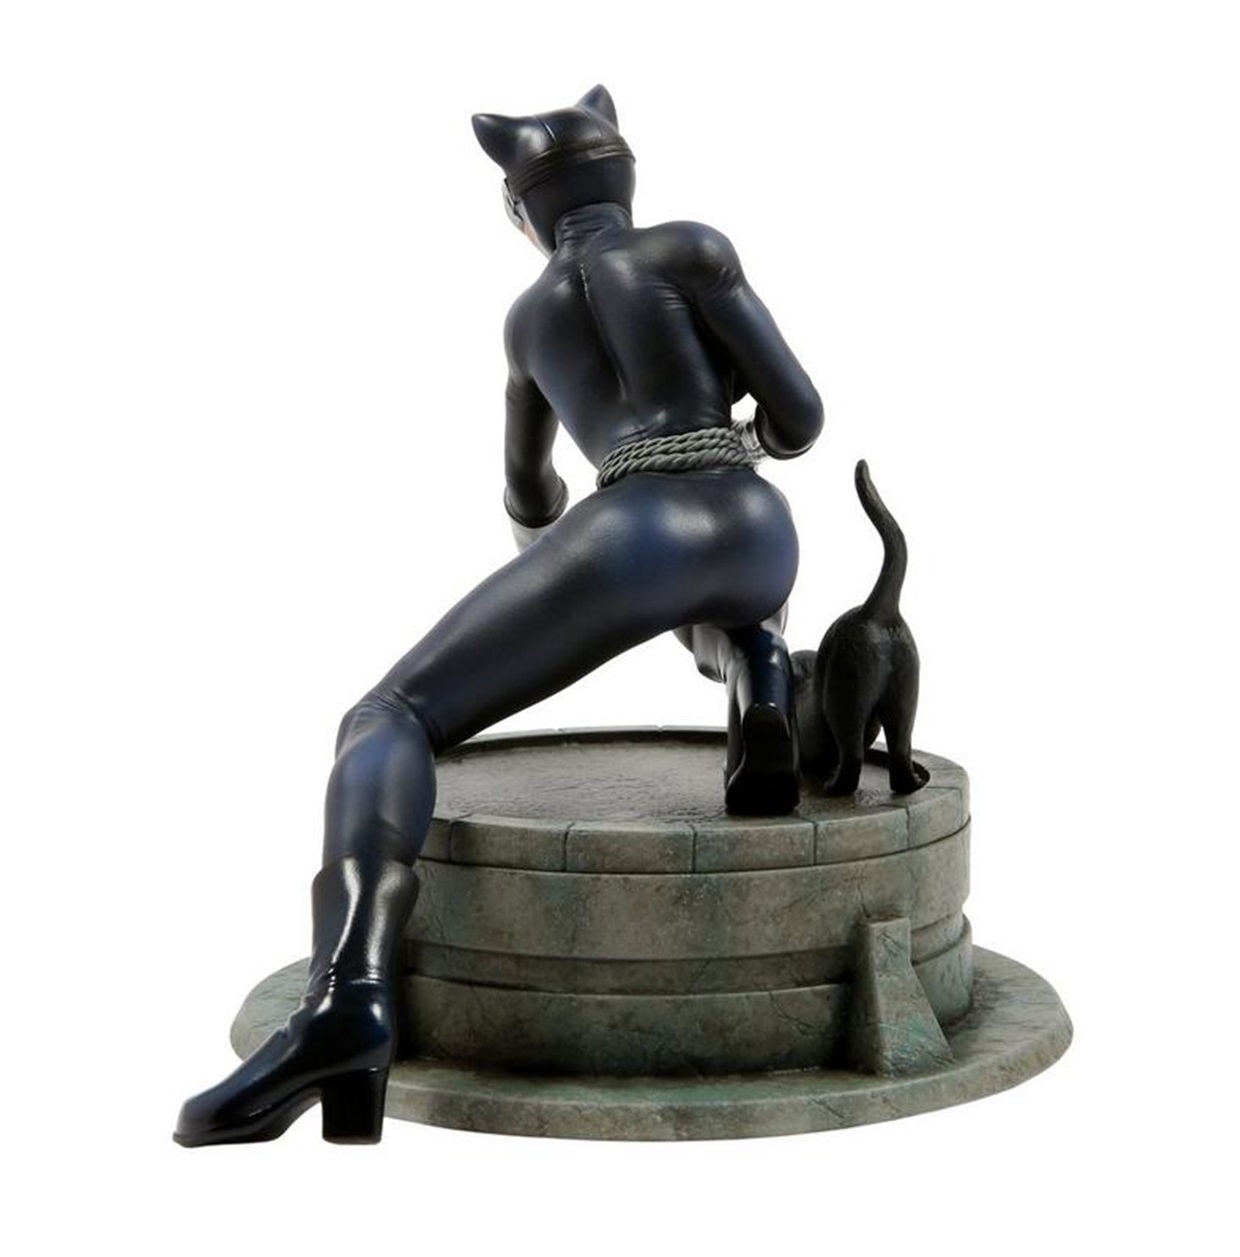 Catwoman Diorama Chronicle Collectibles Exclusivo Game Stop